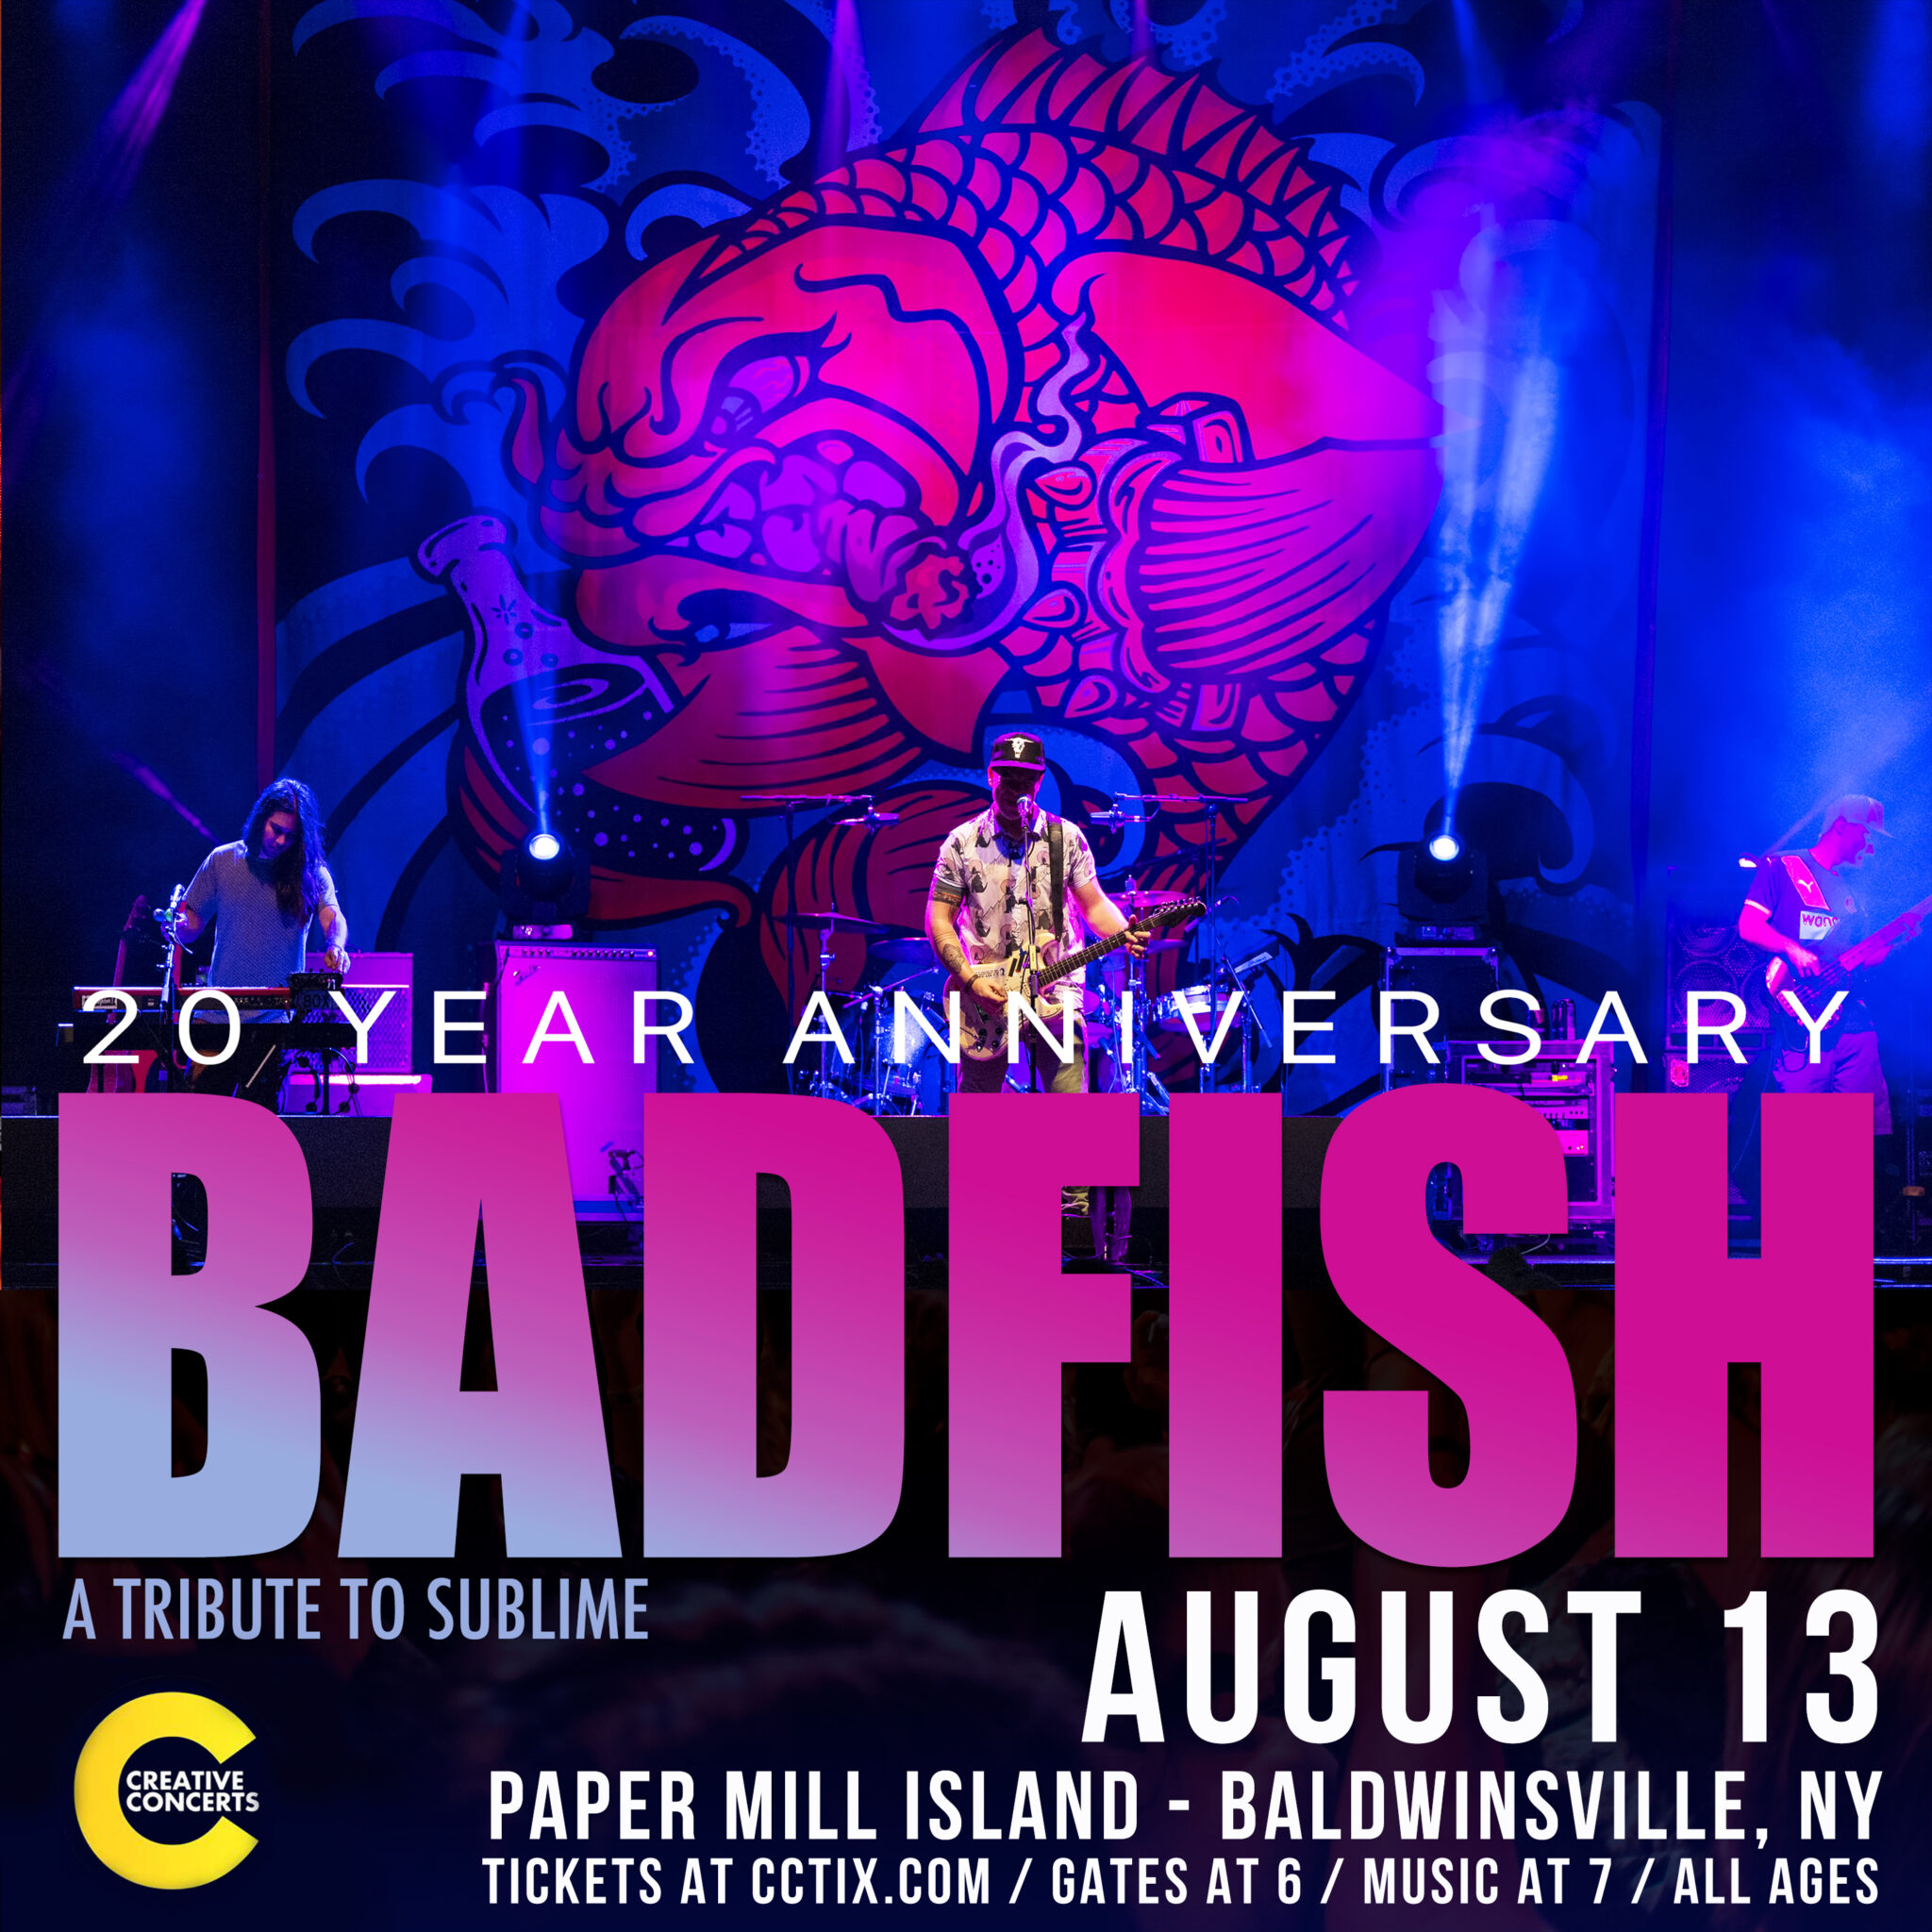 Badfish A Tribute to Sublime arrives at Paper Mill Island on August 13